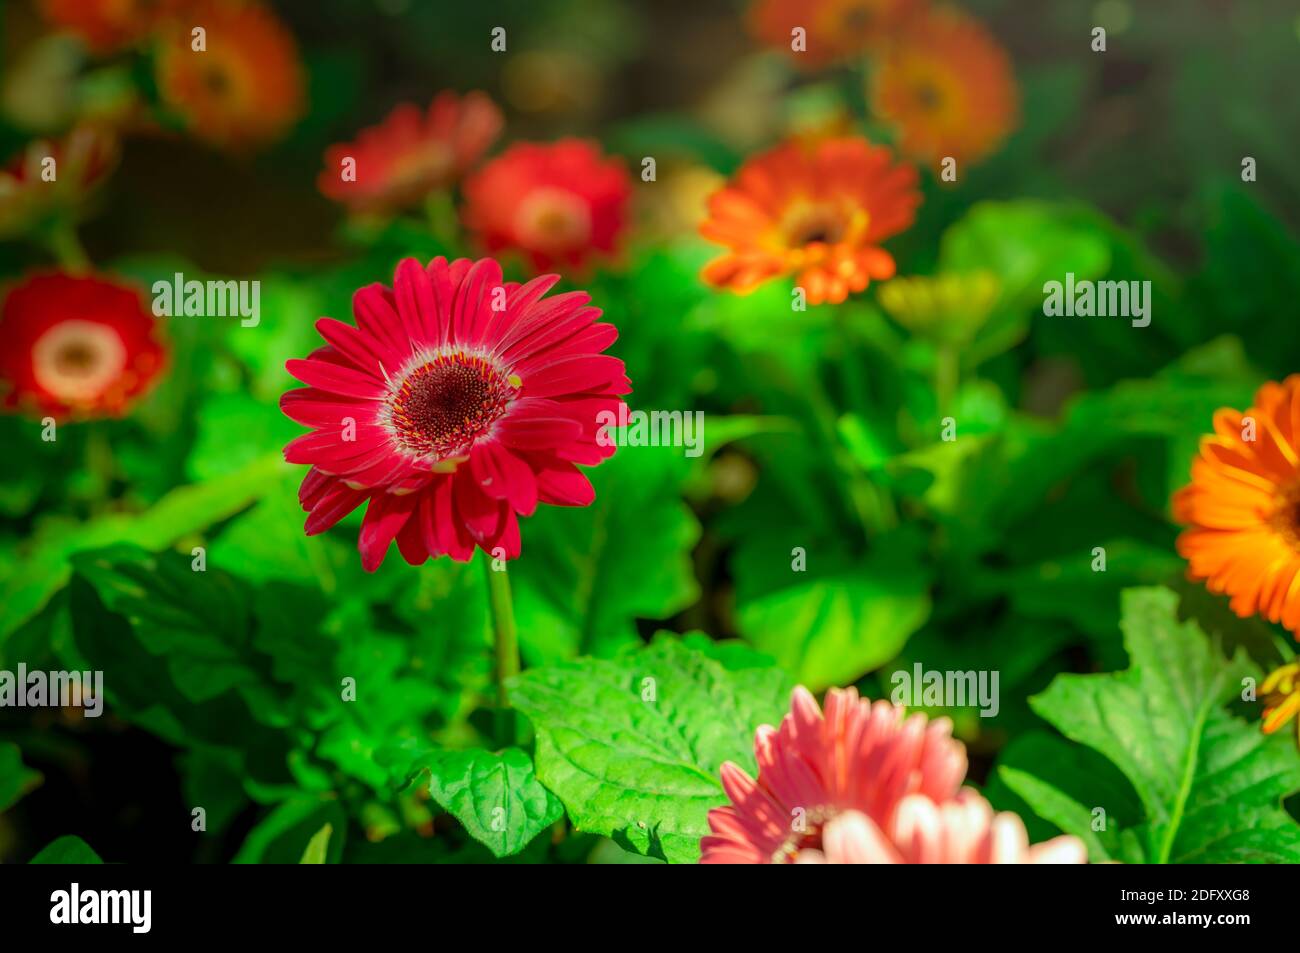 Red gerbera flower on blur background of orange and pink gerbera flowers in garden. Decorative garden plant or as cut flowers. Gentle red petals Stock Photo